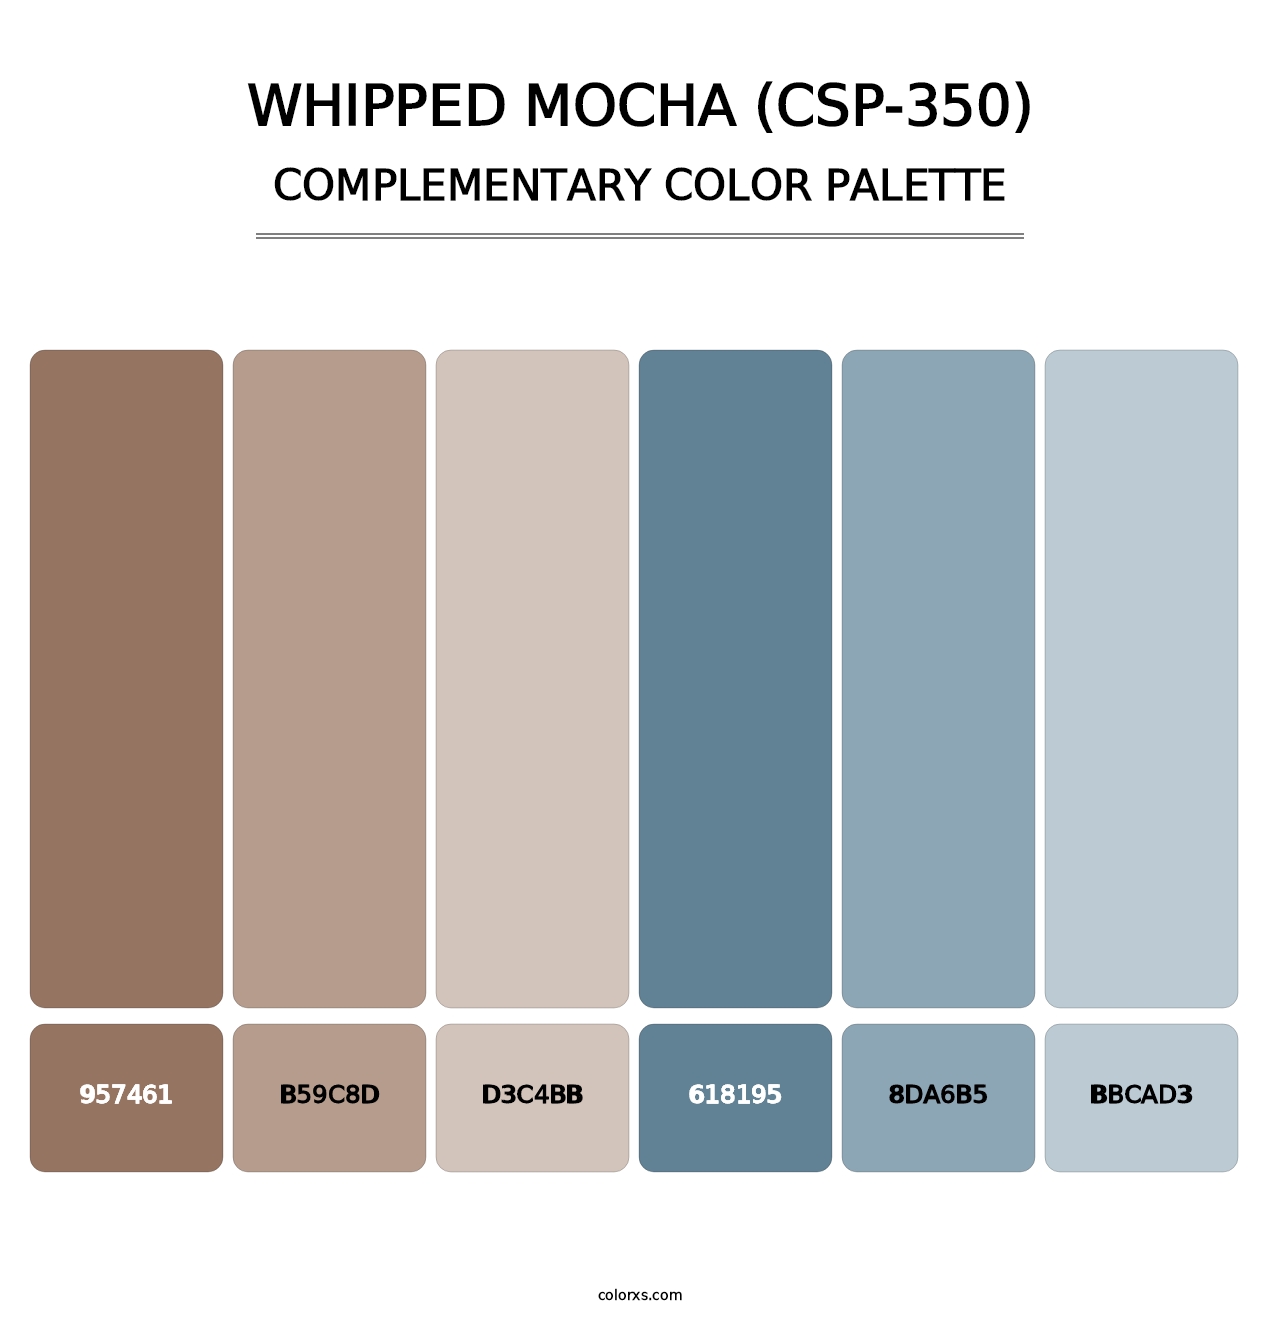 Whipped Mocha (CSP-350) - Complementary Color Palette